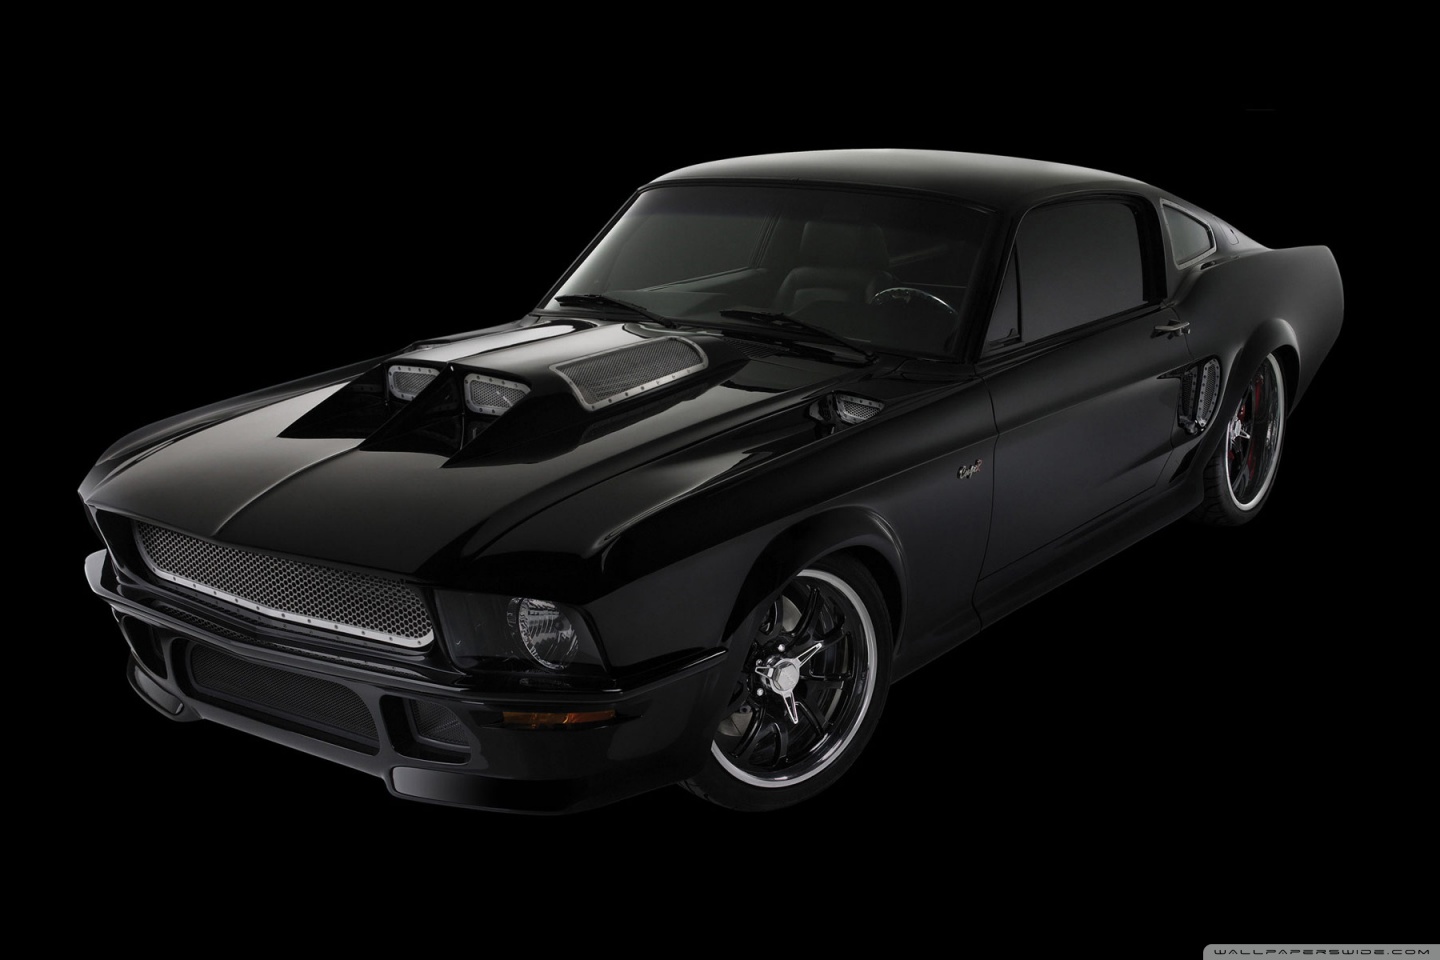 HD wallpaper Look at Me Now photo of Ford Mustang in gray scale photo  black and white  Wallpaper Flare